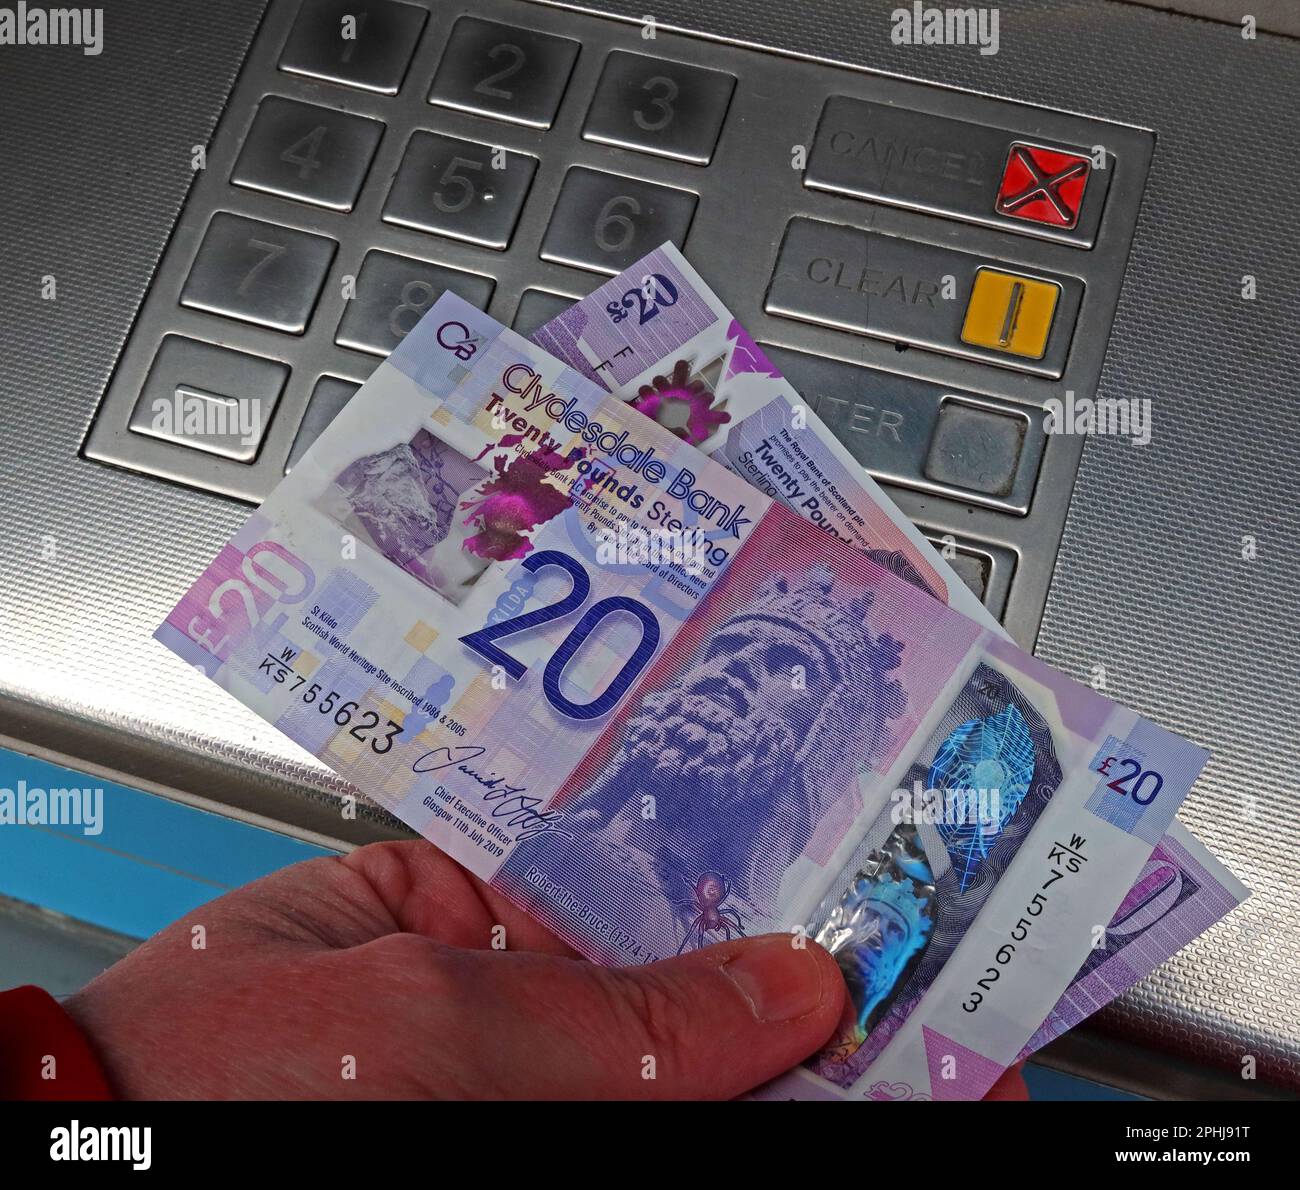 Cash point - Scottish bank notes, dispensed from a local ATM, Automatic Teller cash machine, Glasgow, Scotland, UK, G3 8AD Stock Photo